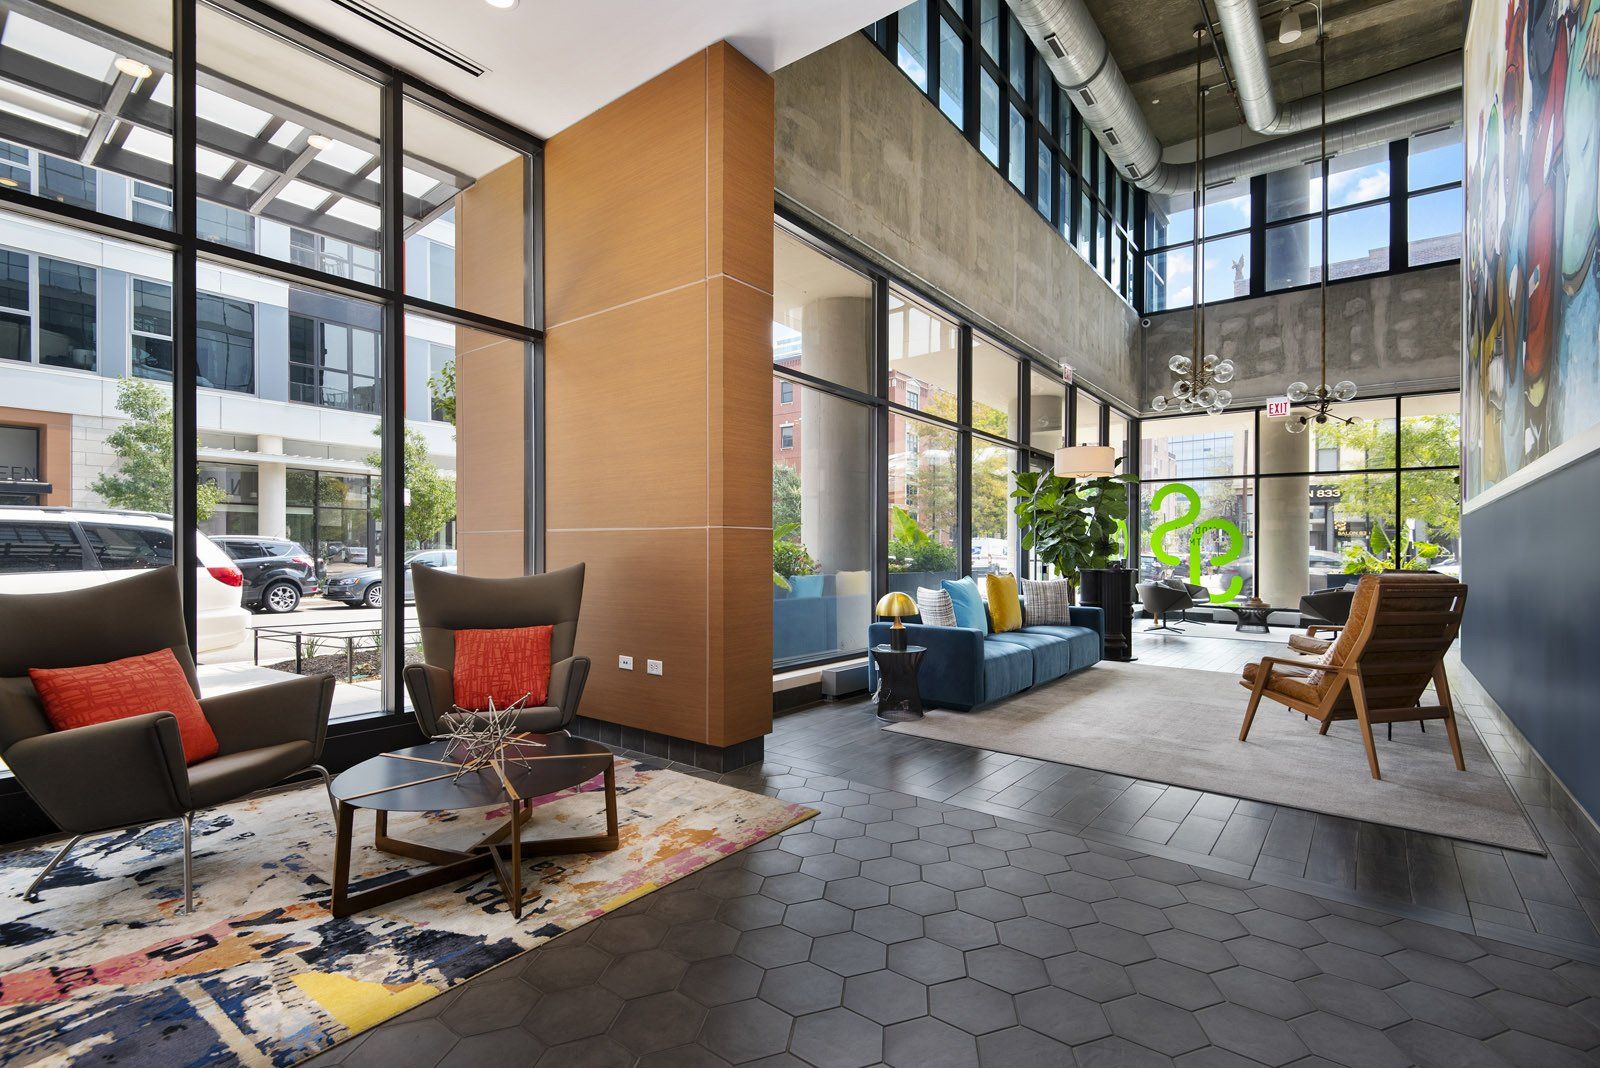 A large lobby with a lot of windows and furniture at Reside on Green Street.